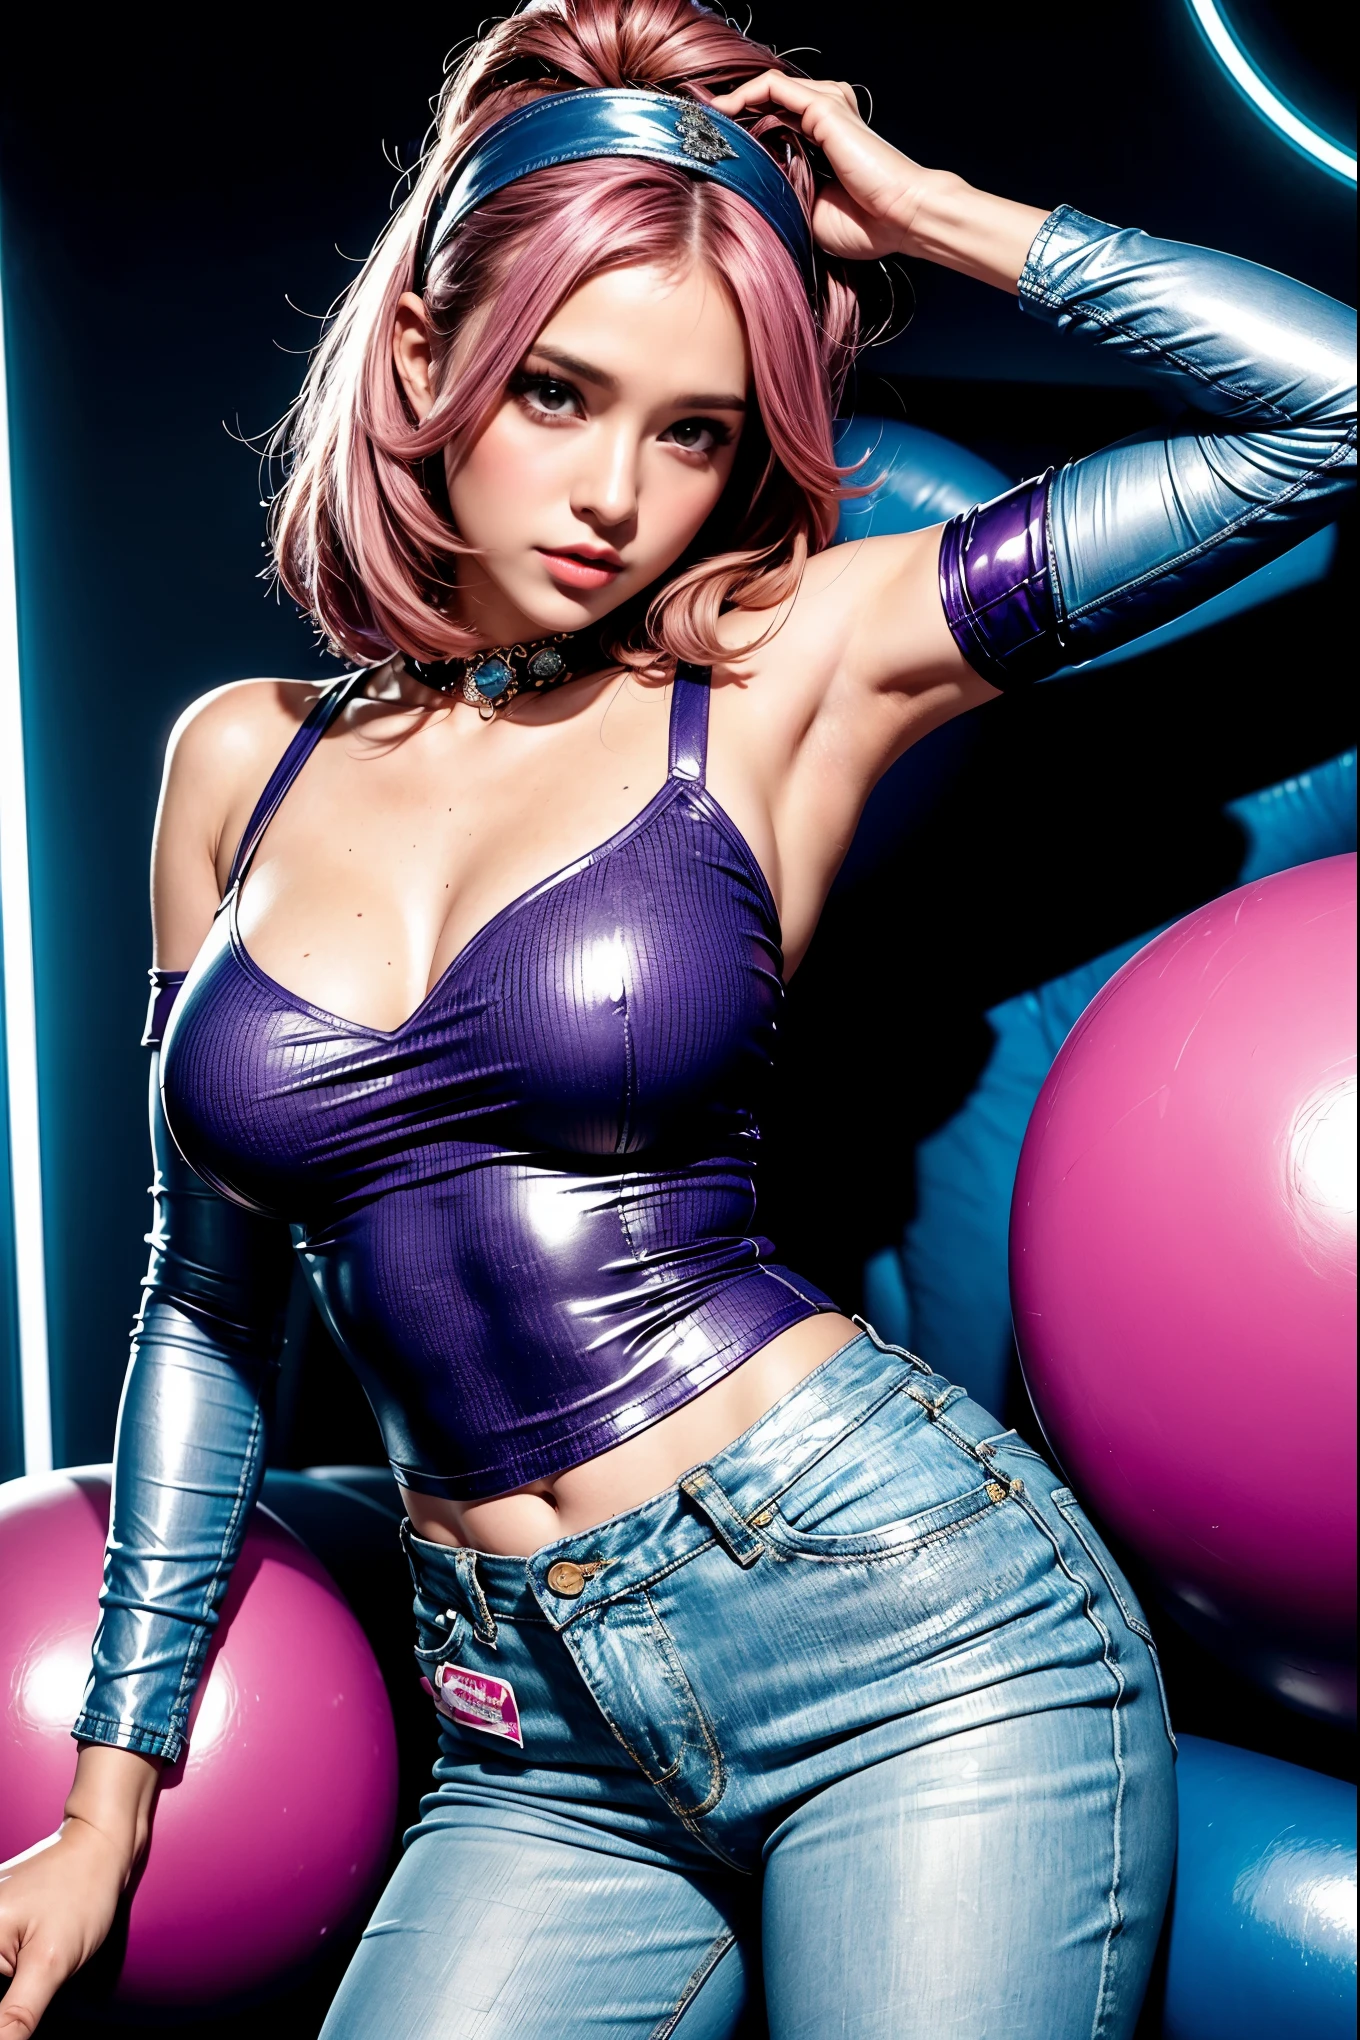 In a vibrant nightclub setting, a young woman embraces the 1980s spirit in a skin-tight, off-the-shoulder bodysuit paired with high-waisted acid-wash jeans. Her hair is teased and styled with a neon headband, and her makeup boasts electric purple eyeshadow and a shimmery coral lip. Her playful pose and daring gaze exude the era's magnetic allure.